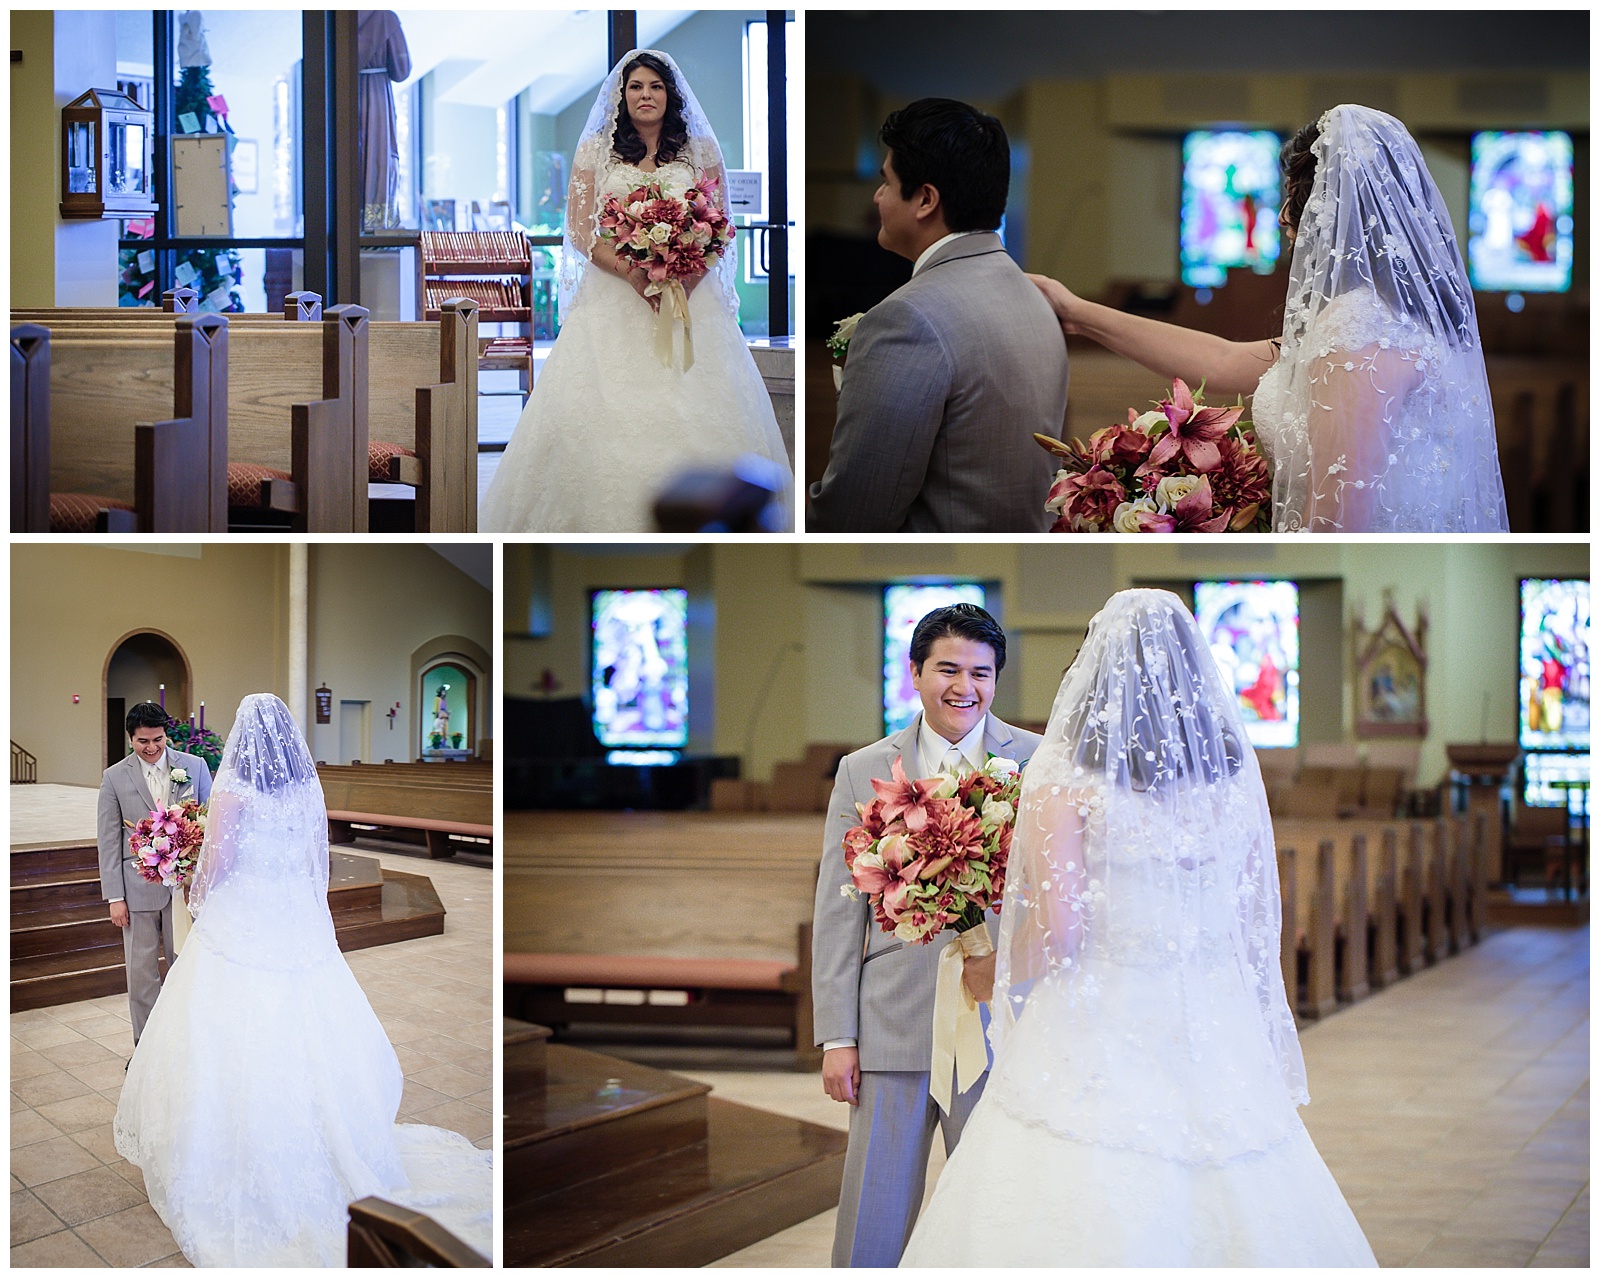 Wedding photography at Church of the Ascension in Overland Park, Kansas.